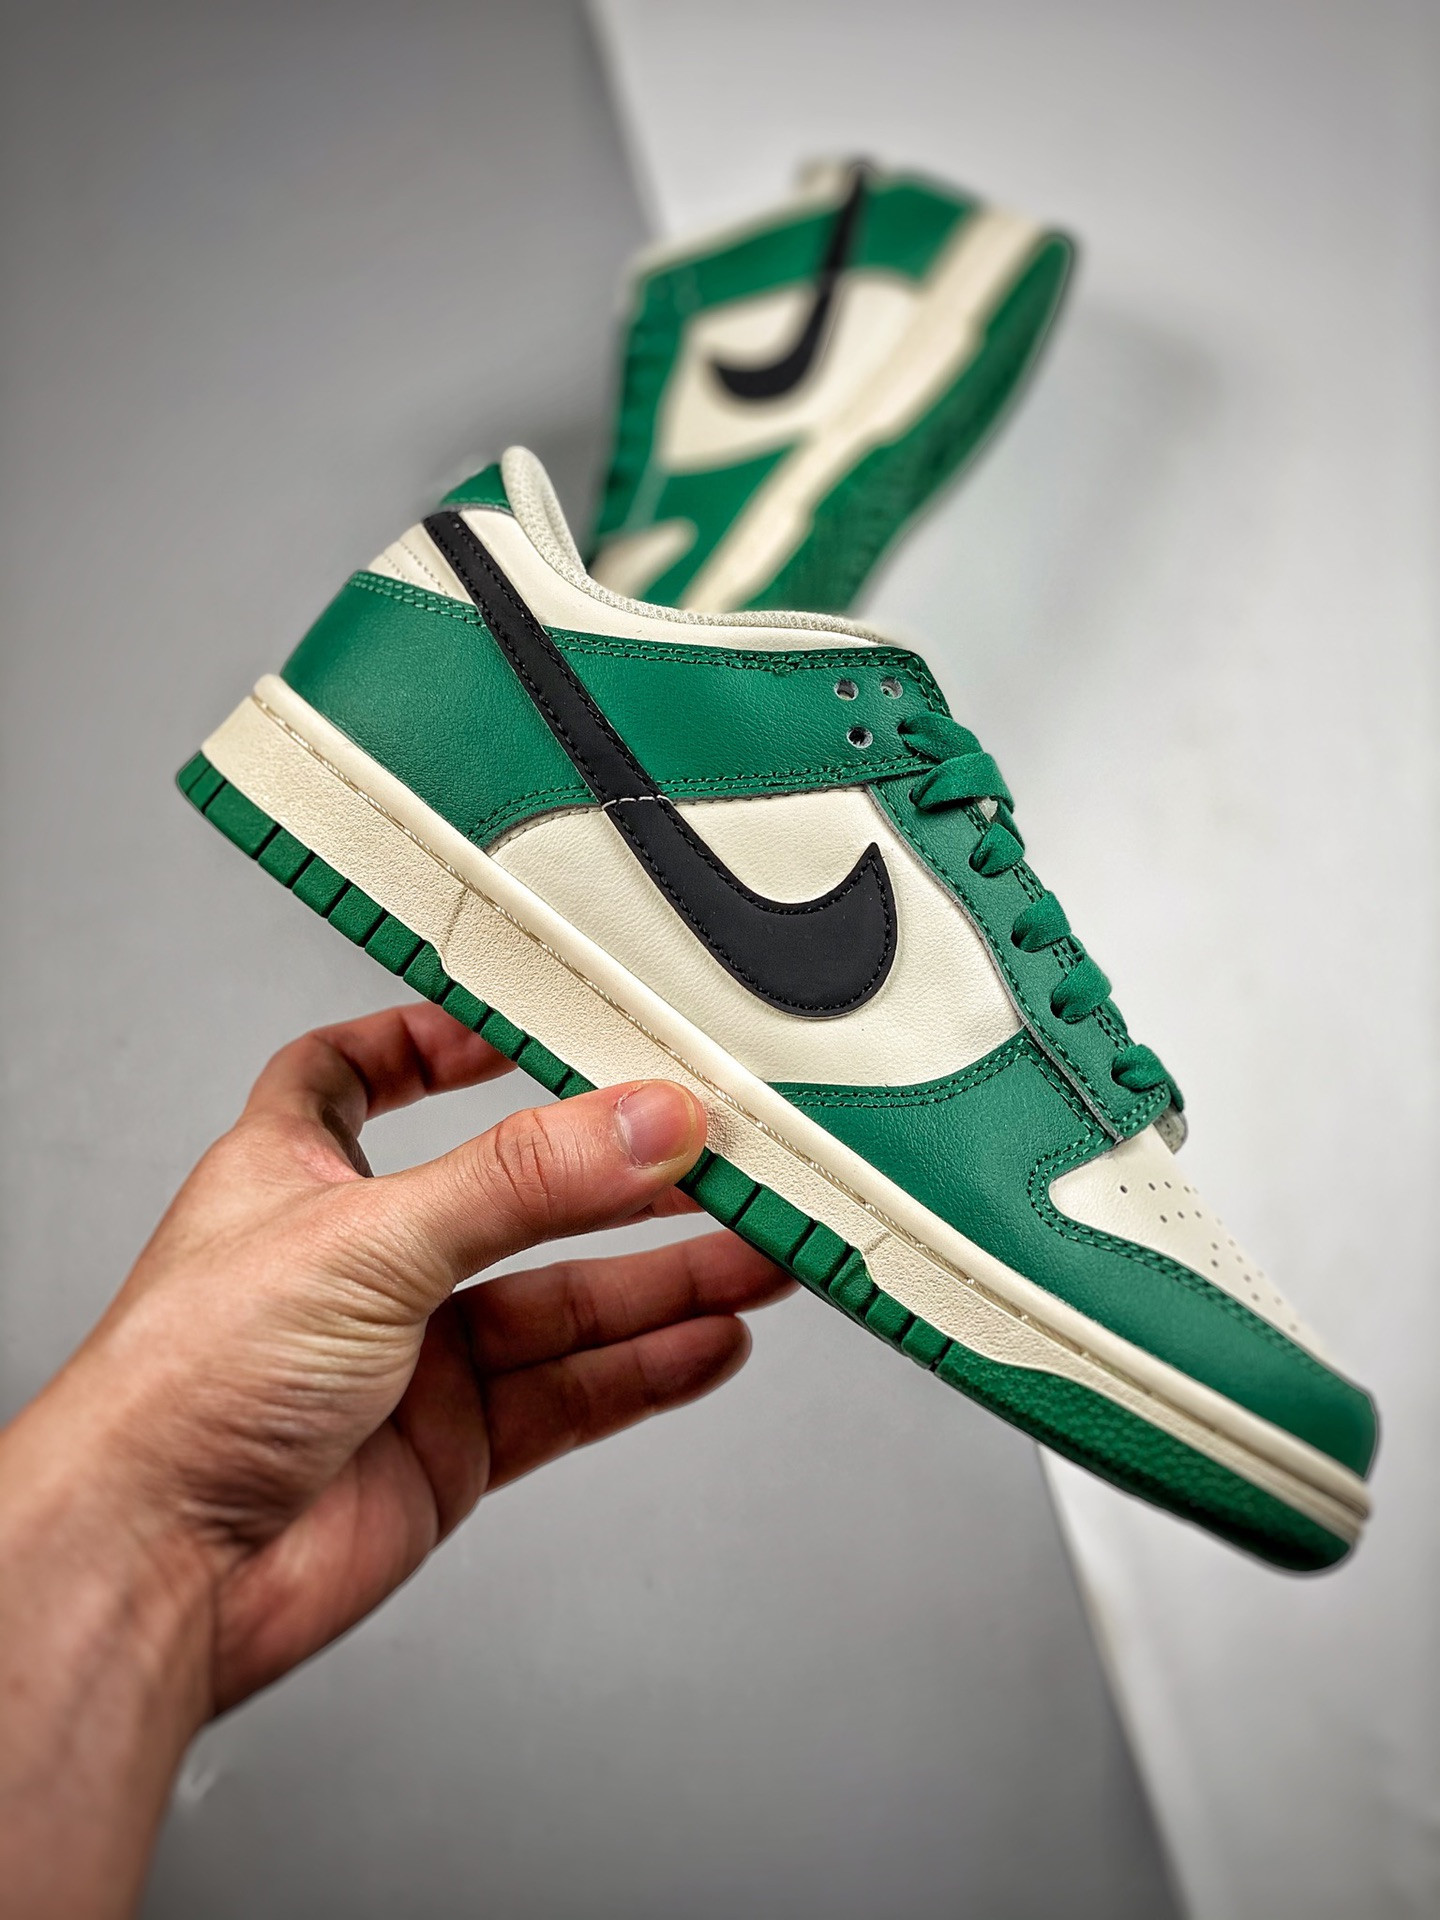 Nike Dunk Low Lottery Pale Ivory Black-Malachite DR9654-100 For Sale